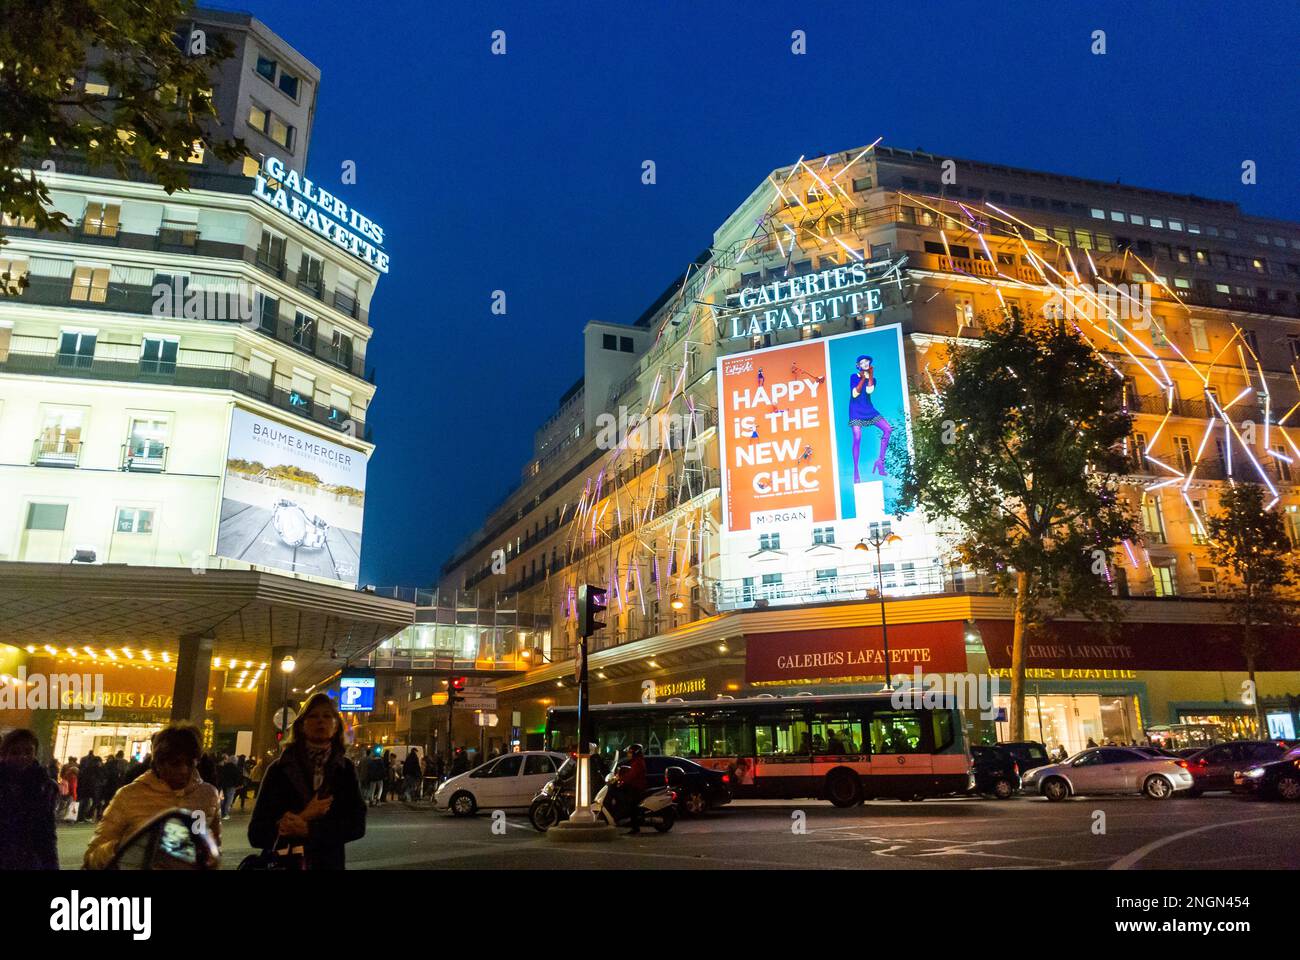 Views outside galeries lafayette department store hi-res stock